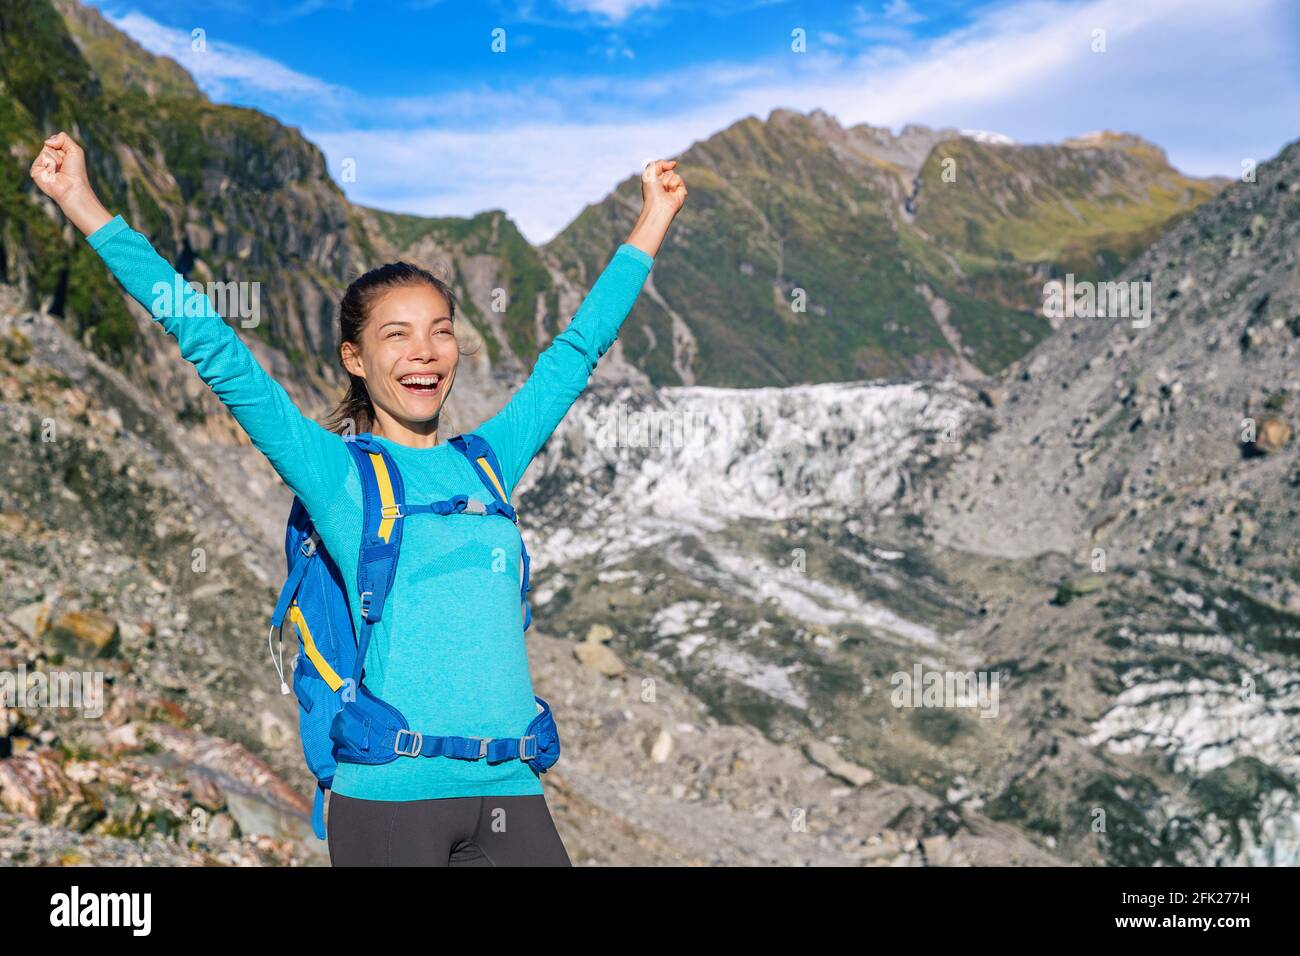 Excited cheering woman on travel adventure excited to travel again. Tourist explorer backpacking nature landscape by Franz Josef Glacier, Westland Tai Stock Photo